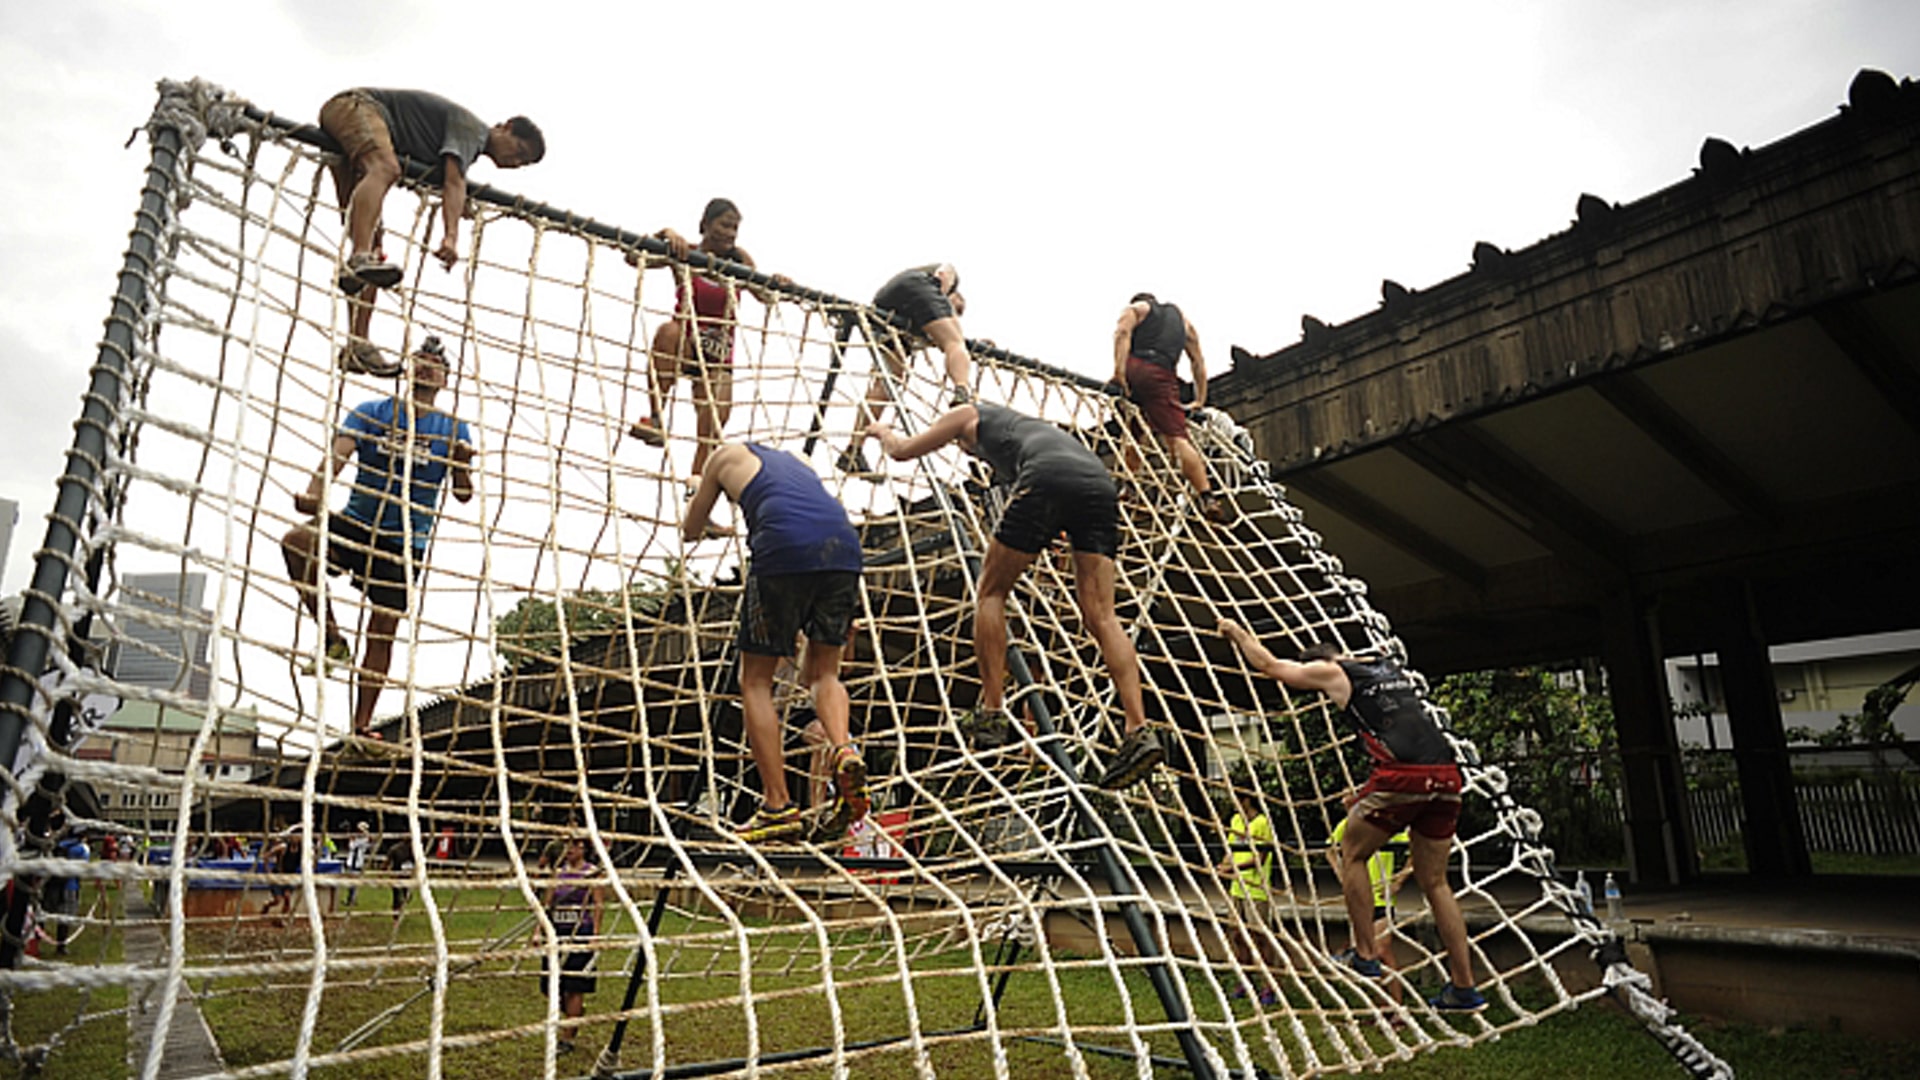 tsc_opt-images_steel-structures_commando-challenge-obstacle-course-1920x1080-01-min